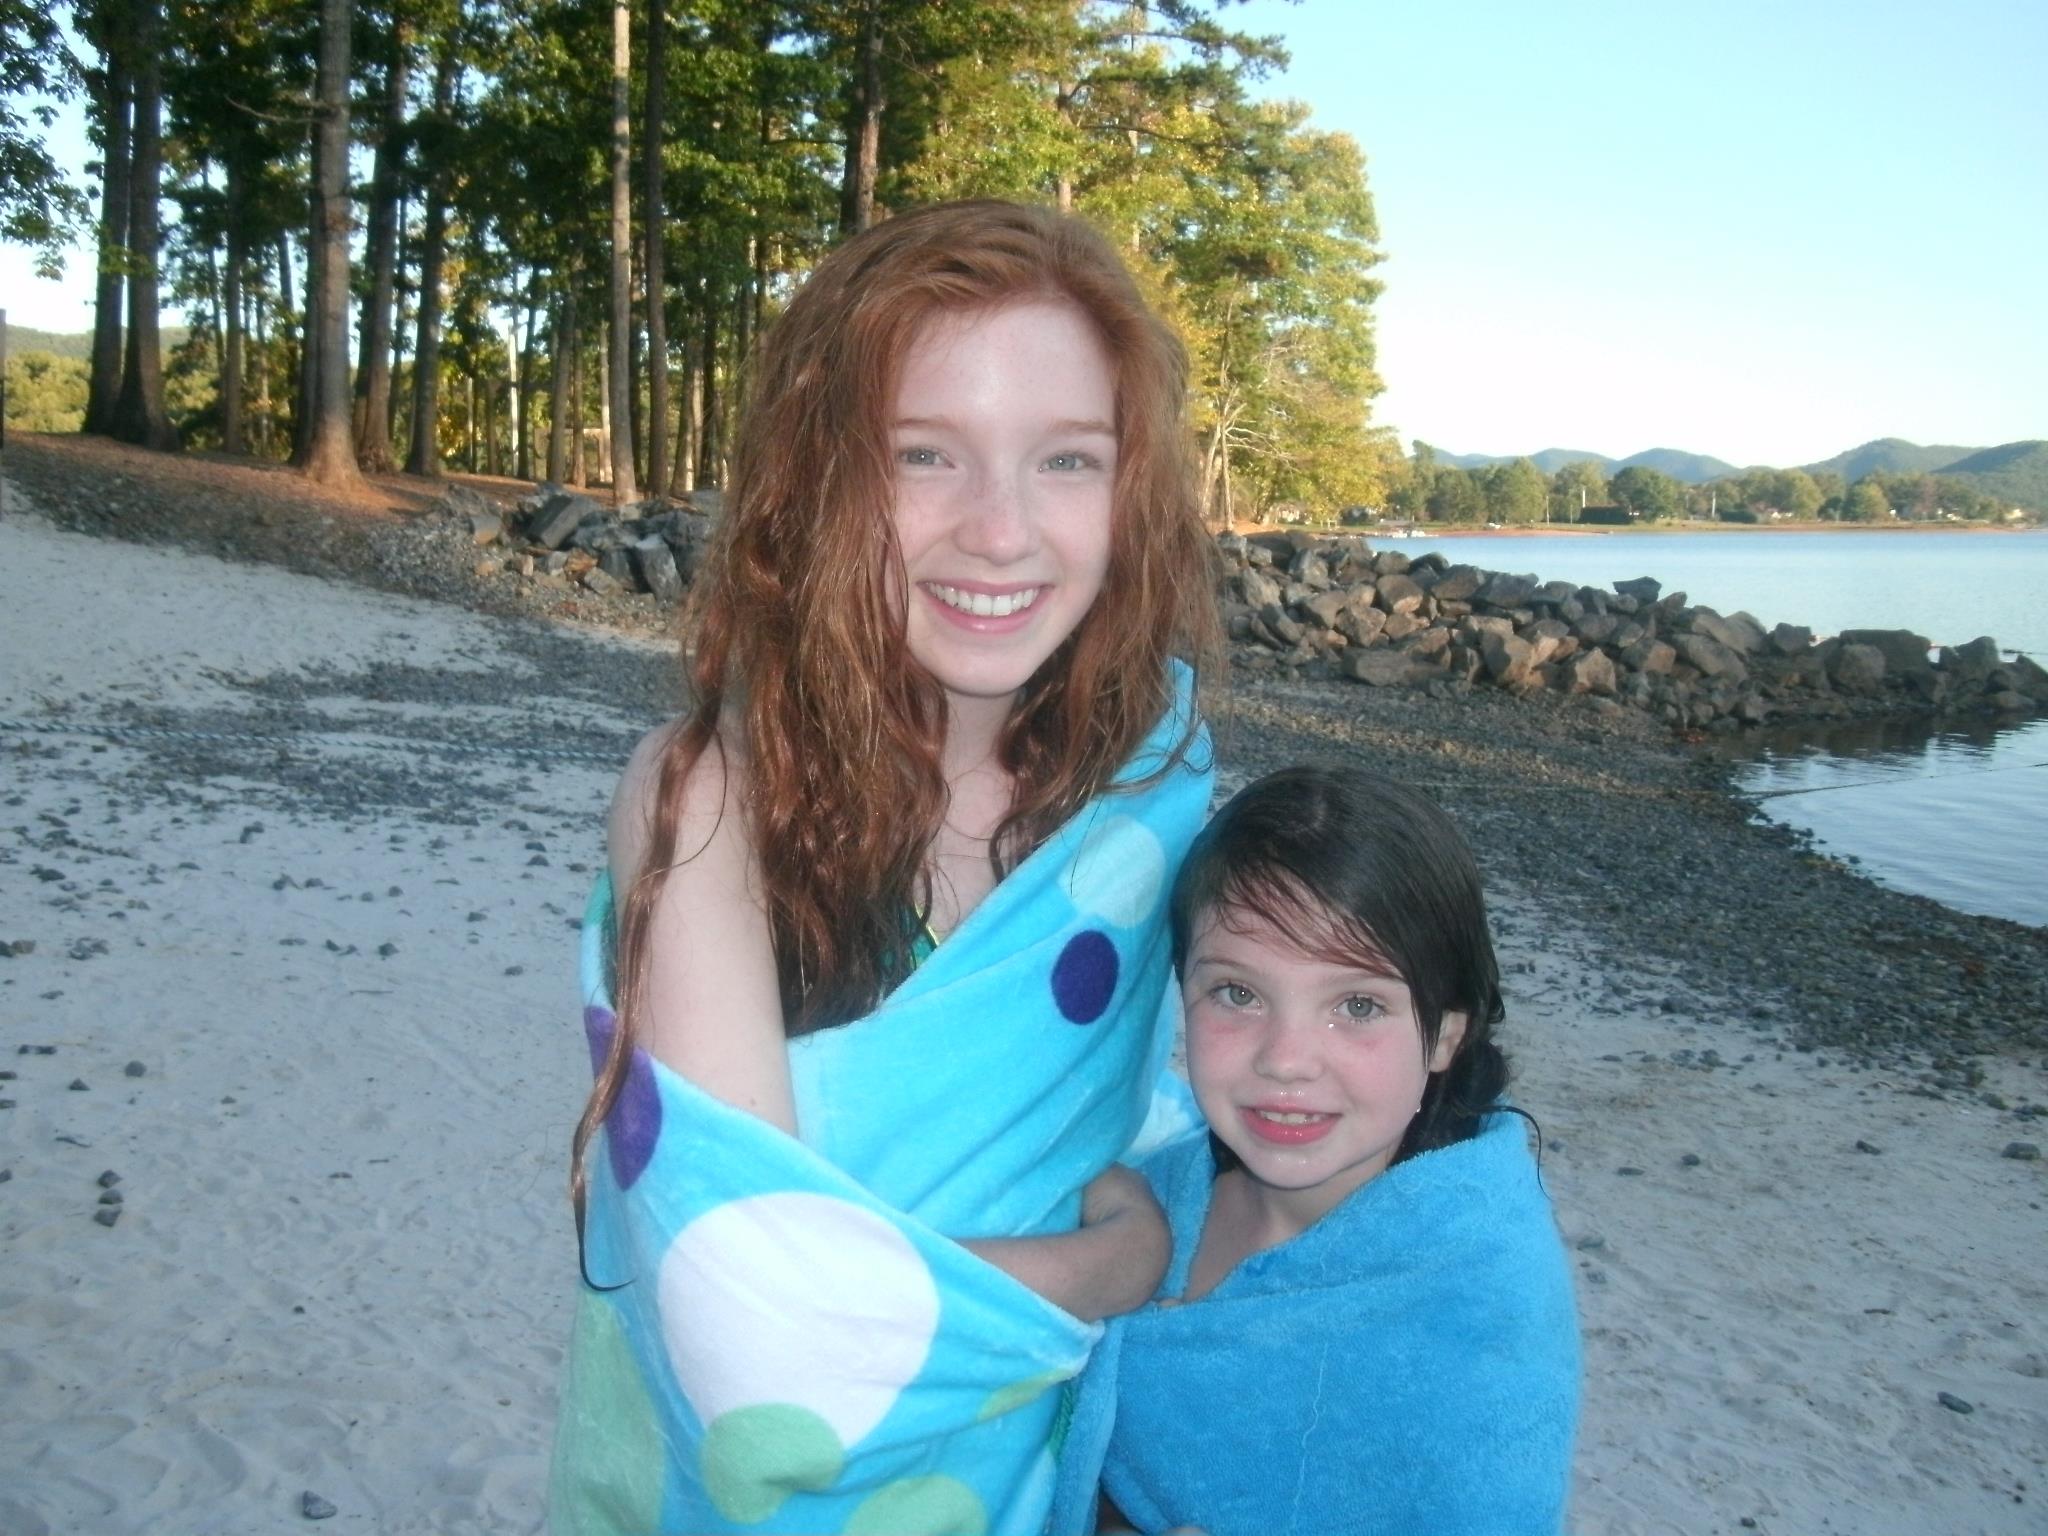 Annalise Basso and Kennedy Brice on set of 